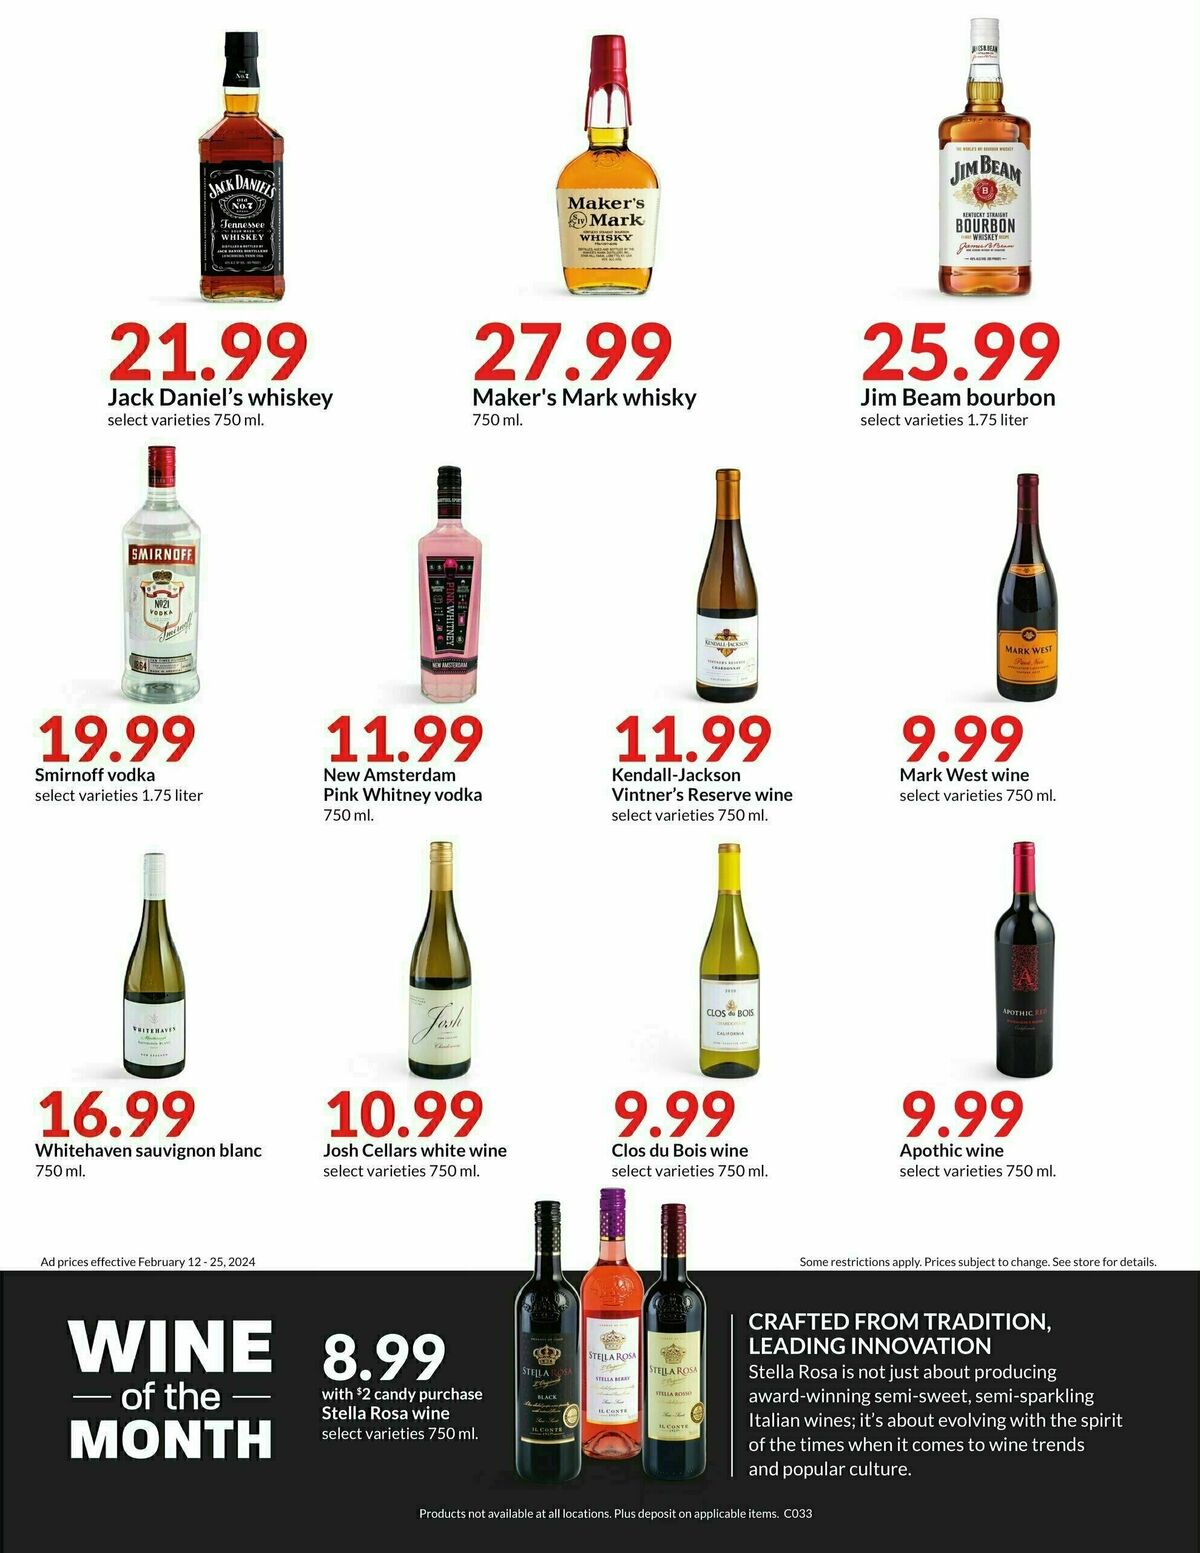 Hy-Vee Weekly Ad from February 12